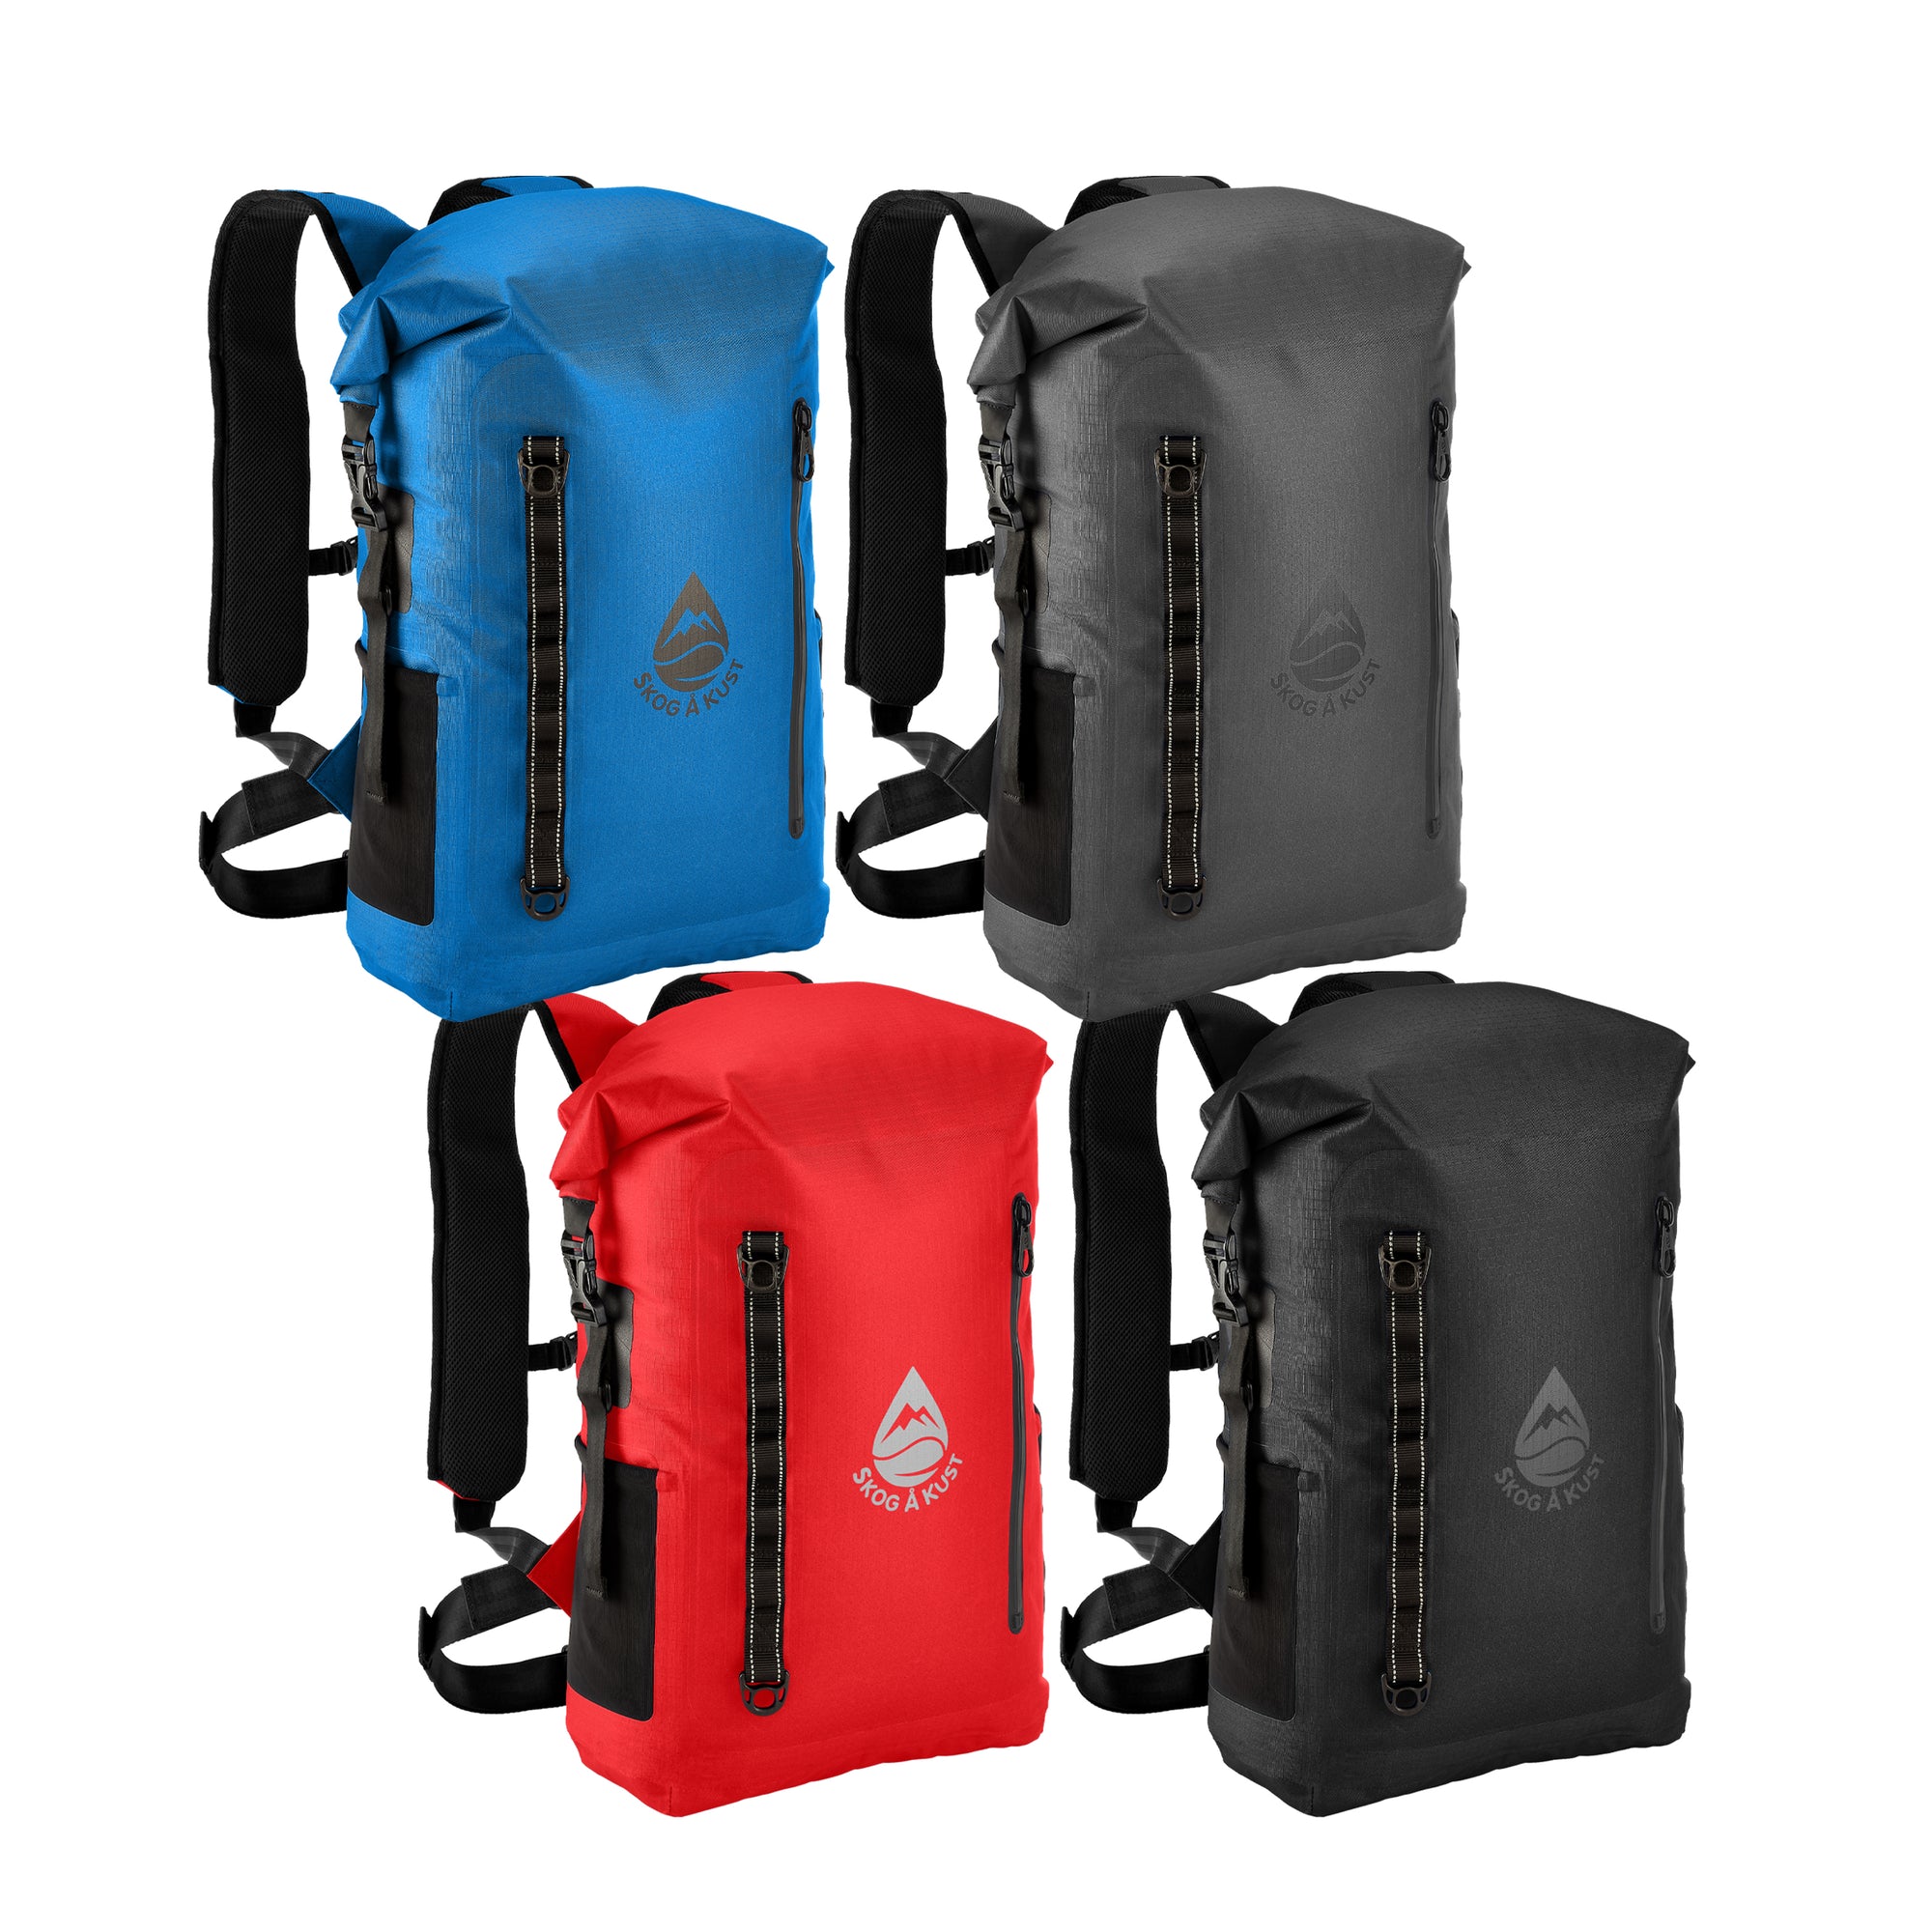 BackSak Pro 35L waterproof backpack photo showing blue, black, grey and red colour options